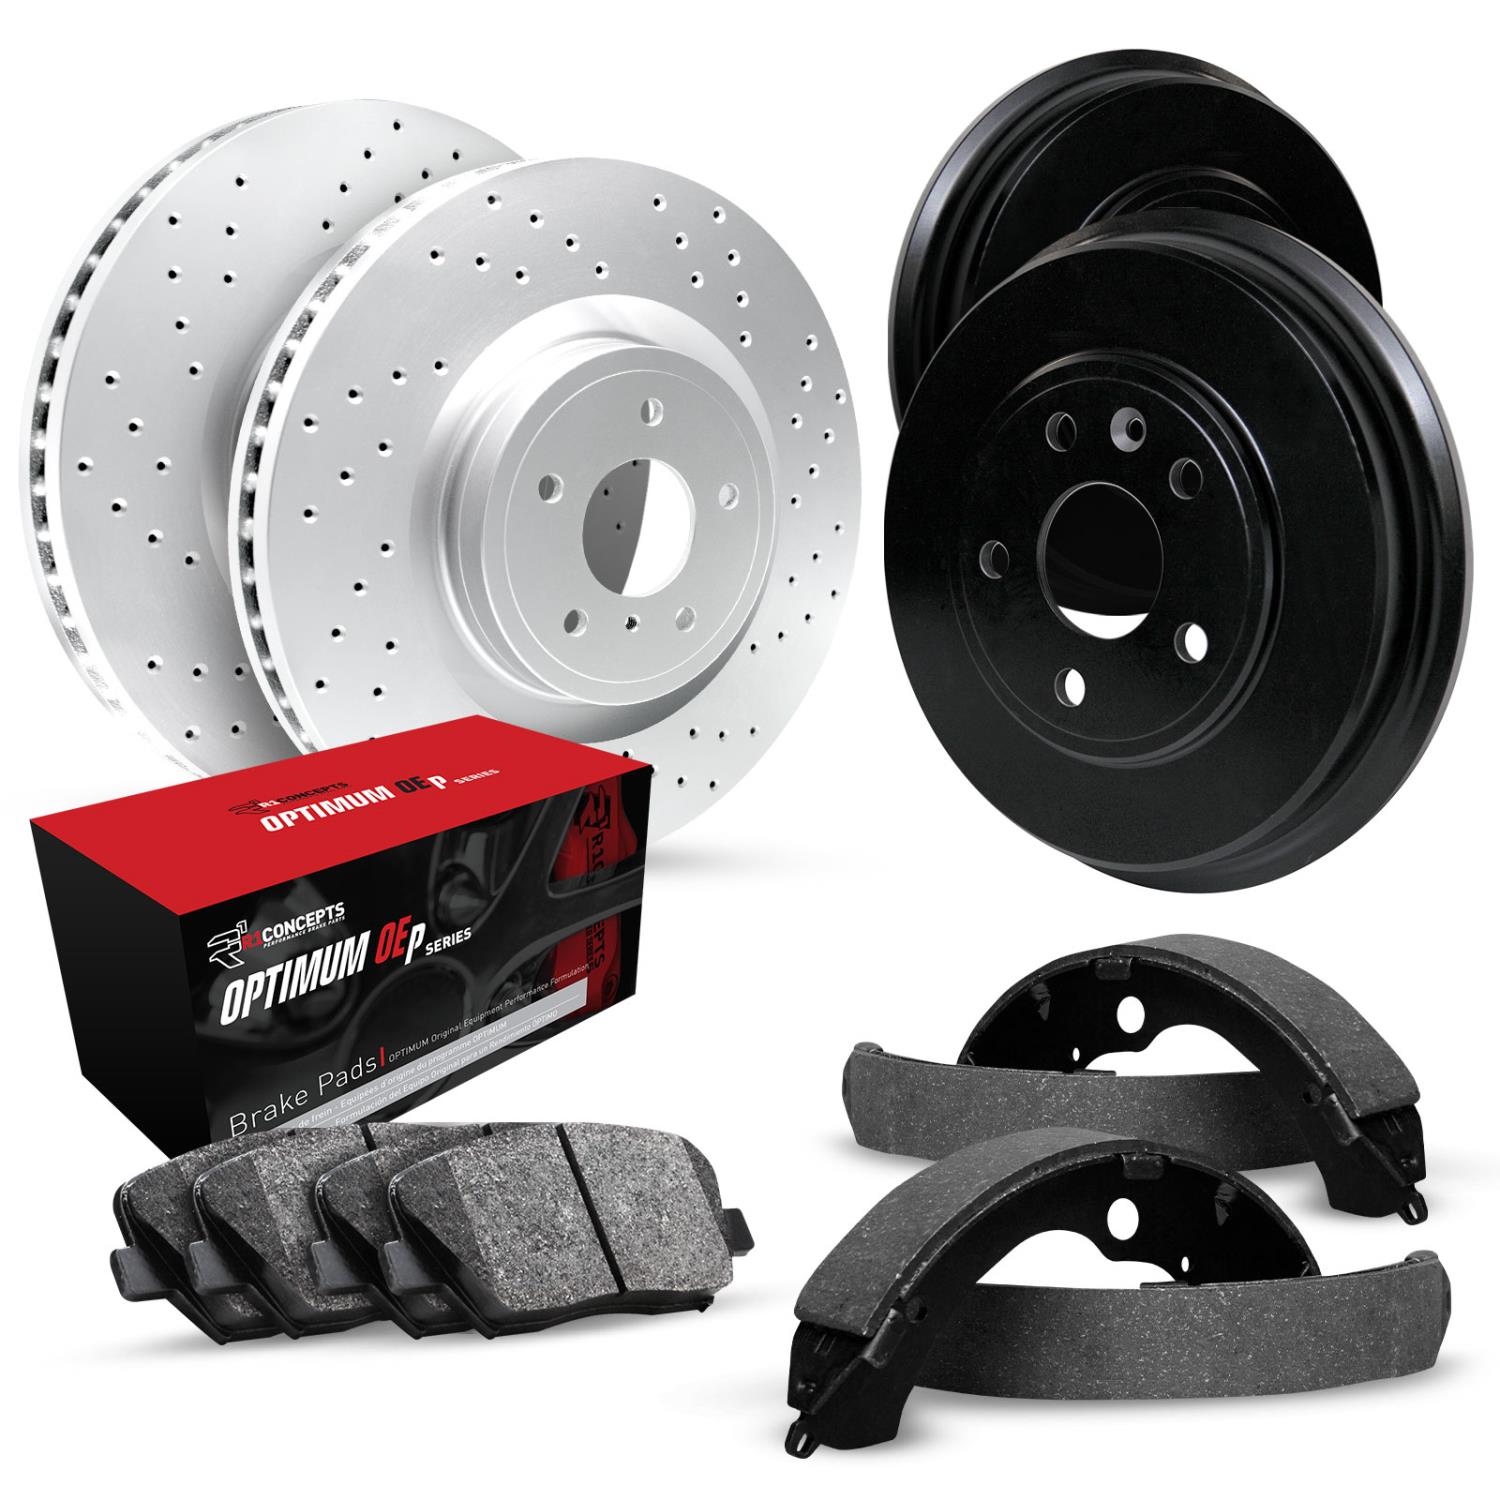 GEO-Carbon Drilled Brake Rotor & Drum Set w/Optimum OE Pads & Shoes, 1990-2000 GM, Position: Front & Rear